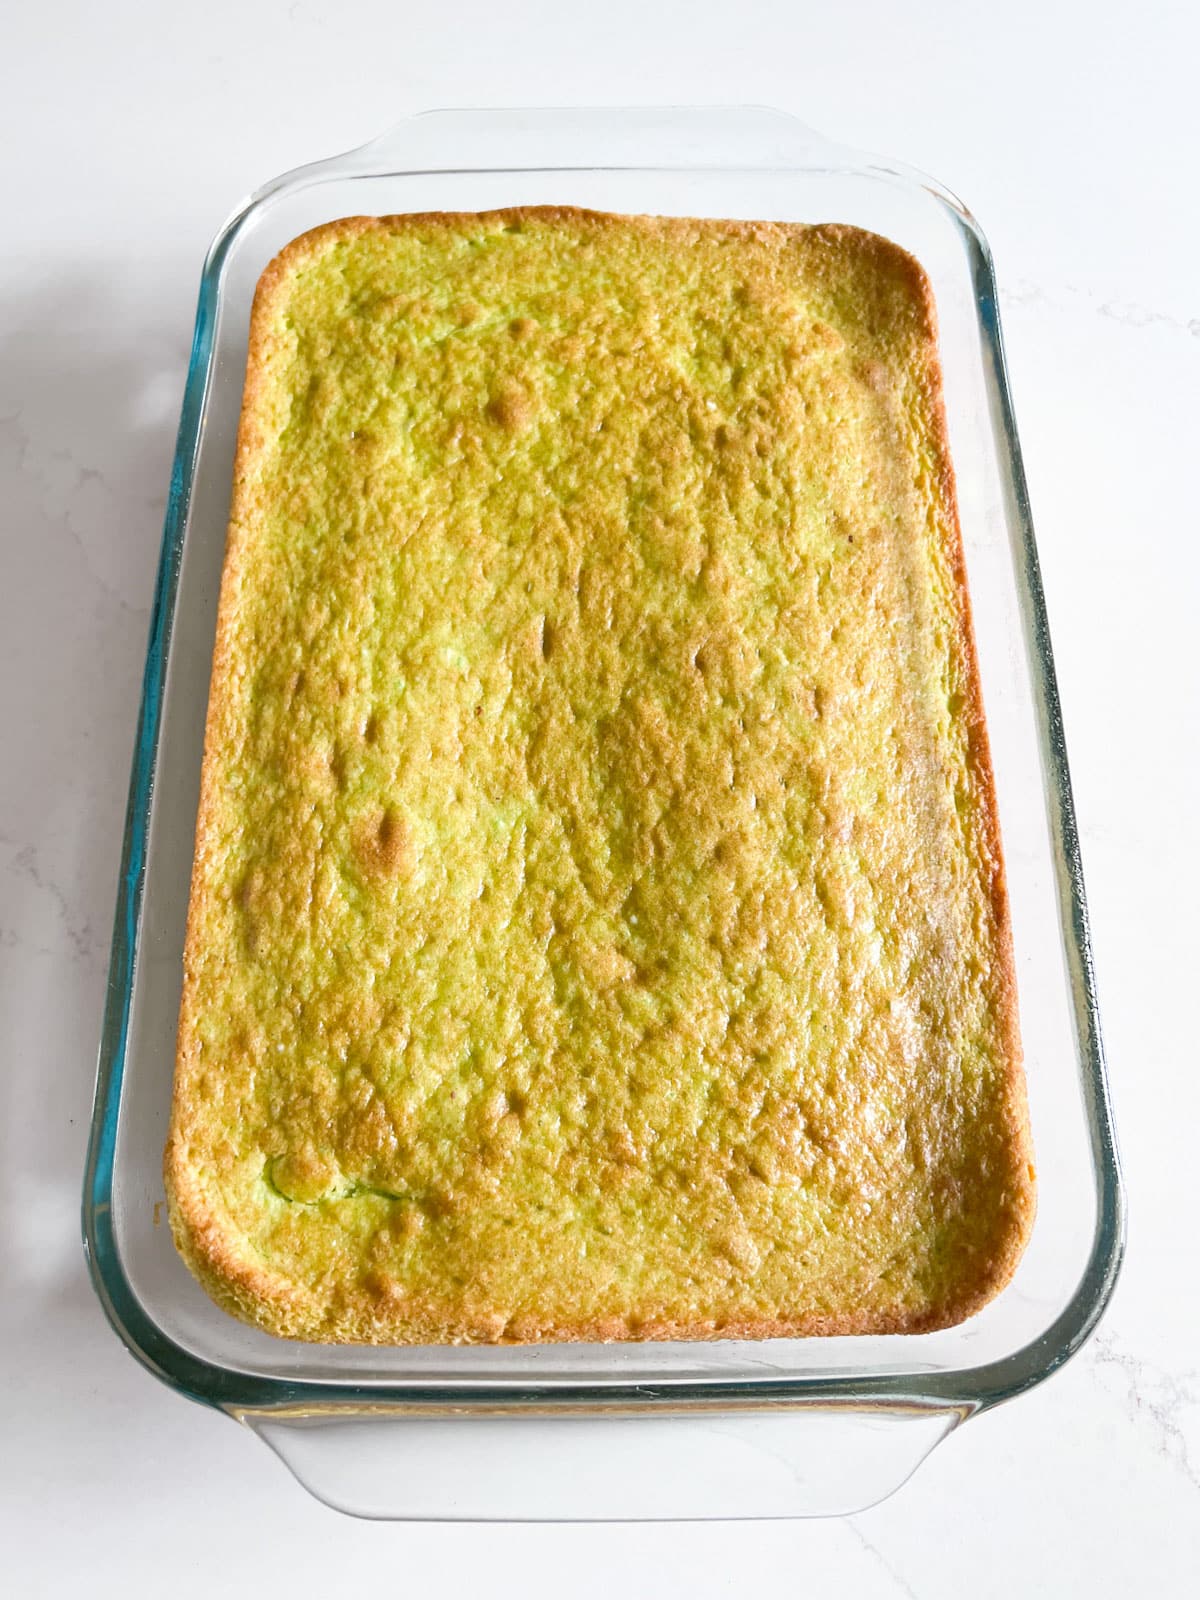 The baked and cooked cake in a rectangular glass pan.